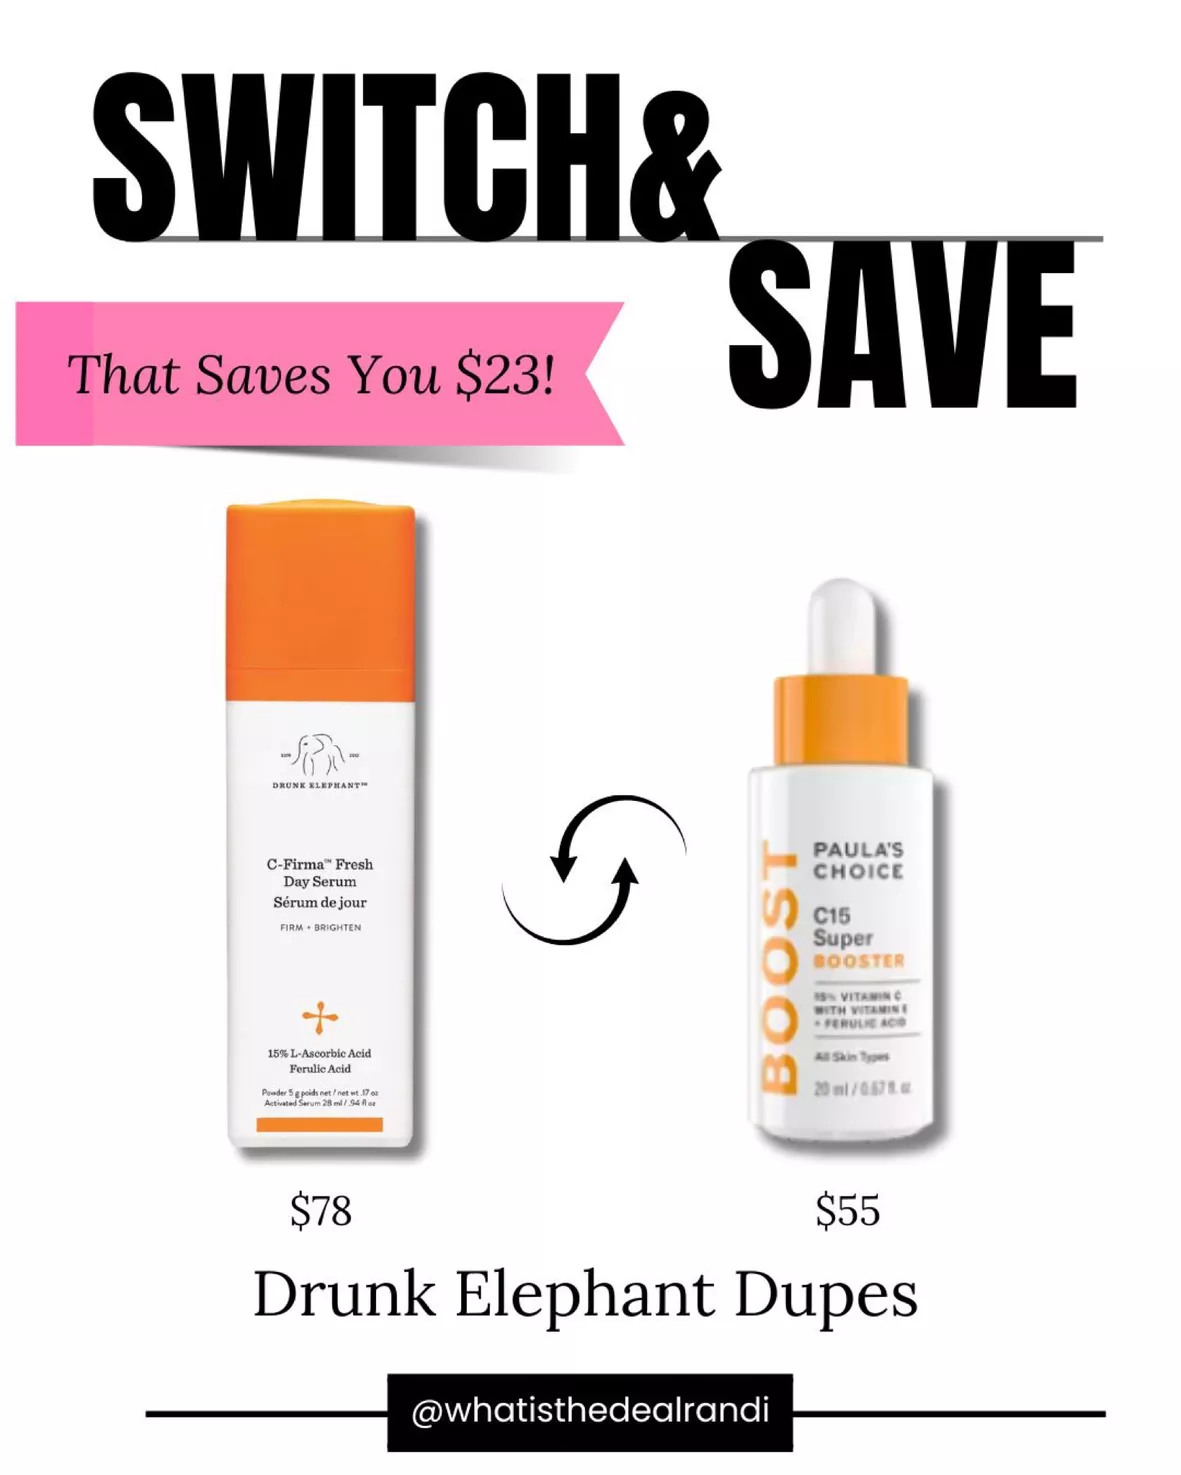 Drunk Elephant: Firmy - The Day Kit  Cult beauty brand Drunk Elephant from  USA has released their holiday gift sets and here we have Firmy - The Day  Kit to keep